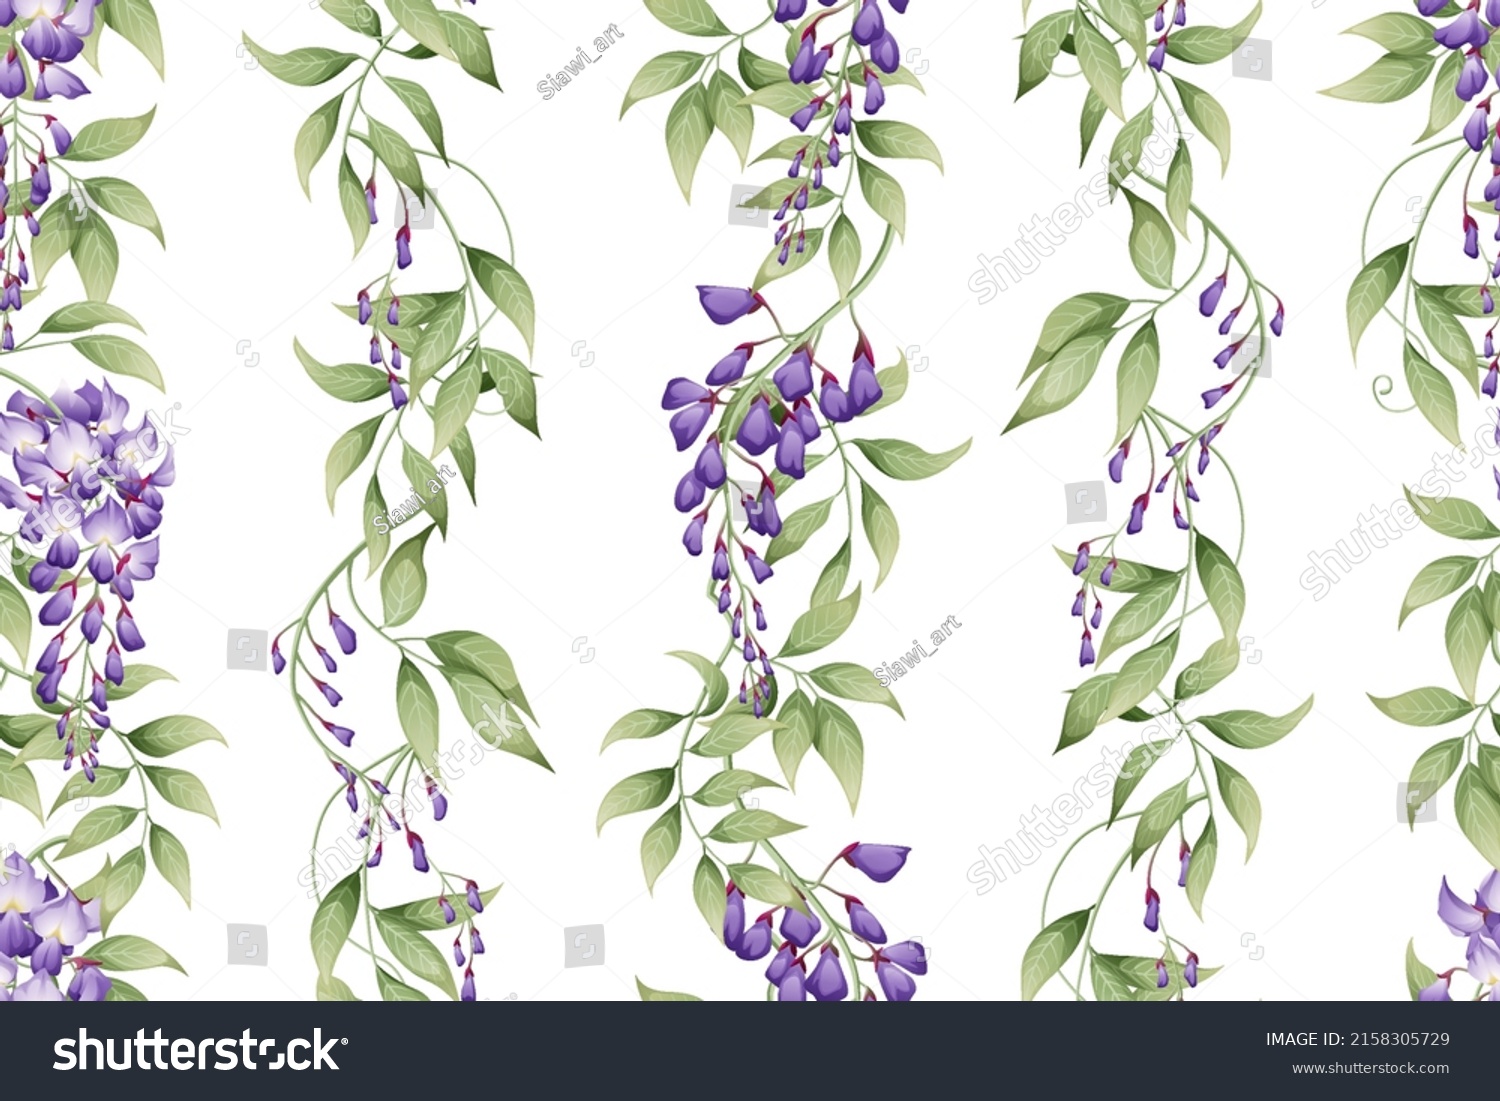 SVG of Seamless vertical pattern with purple wisteria and green leaves. Wallpaper, fabric, wrapping paper, scrapbooking paper. svg